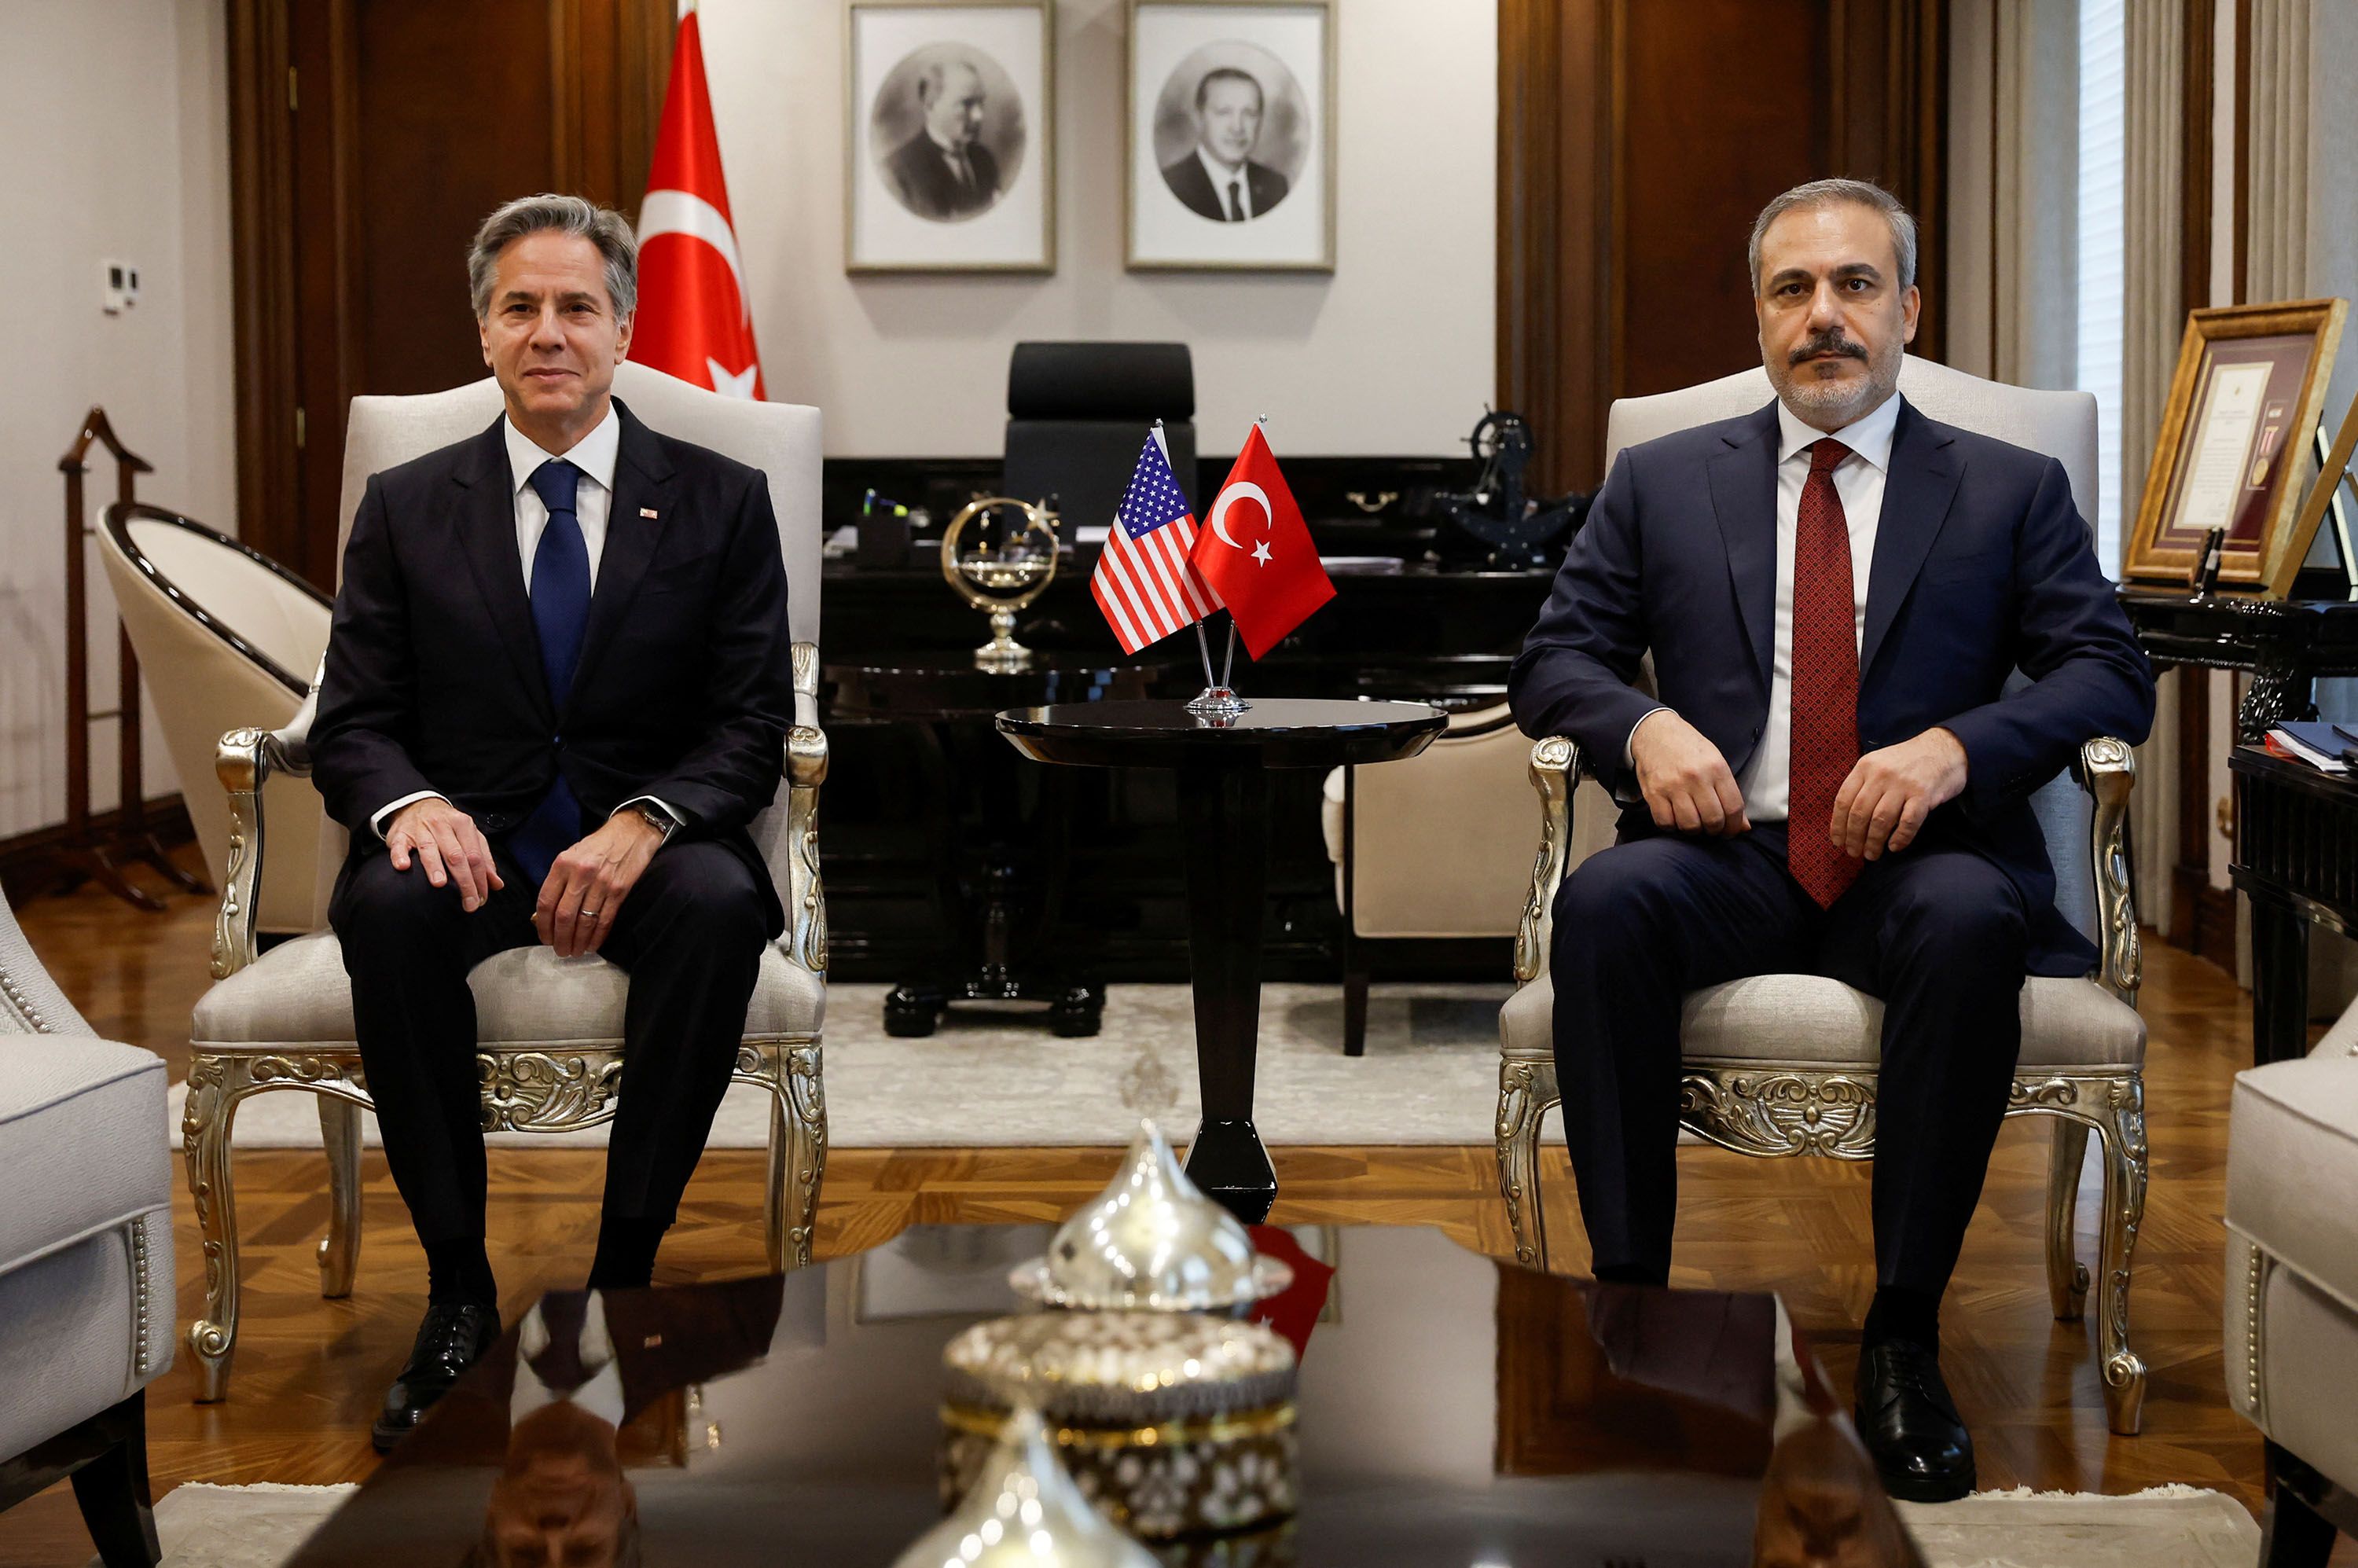 US Secretary of State Antony Blinken meets with Turkish Foreign Minister Hakan Fidan at the Ministry of Foreign Affairs in Ankara, Turkey, on Monday, November 6. Jonathan Ernst/Pool/Reuters